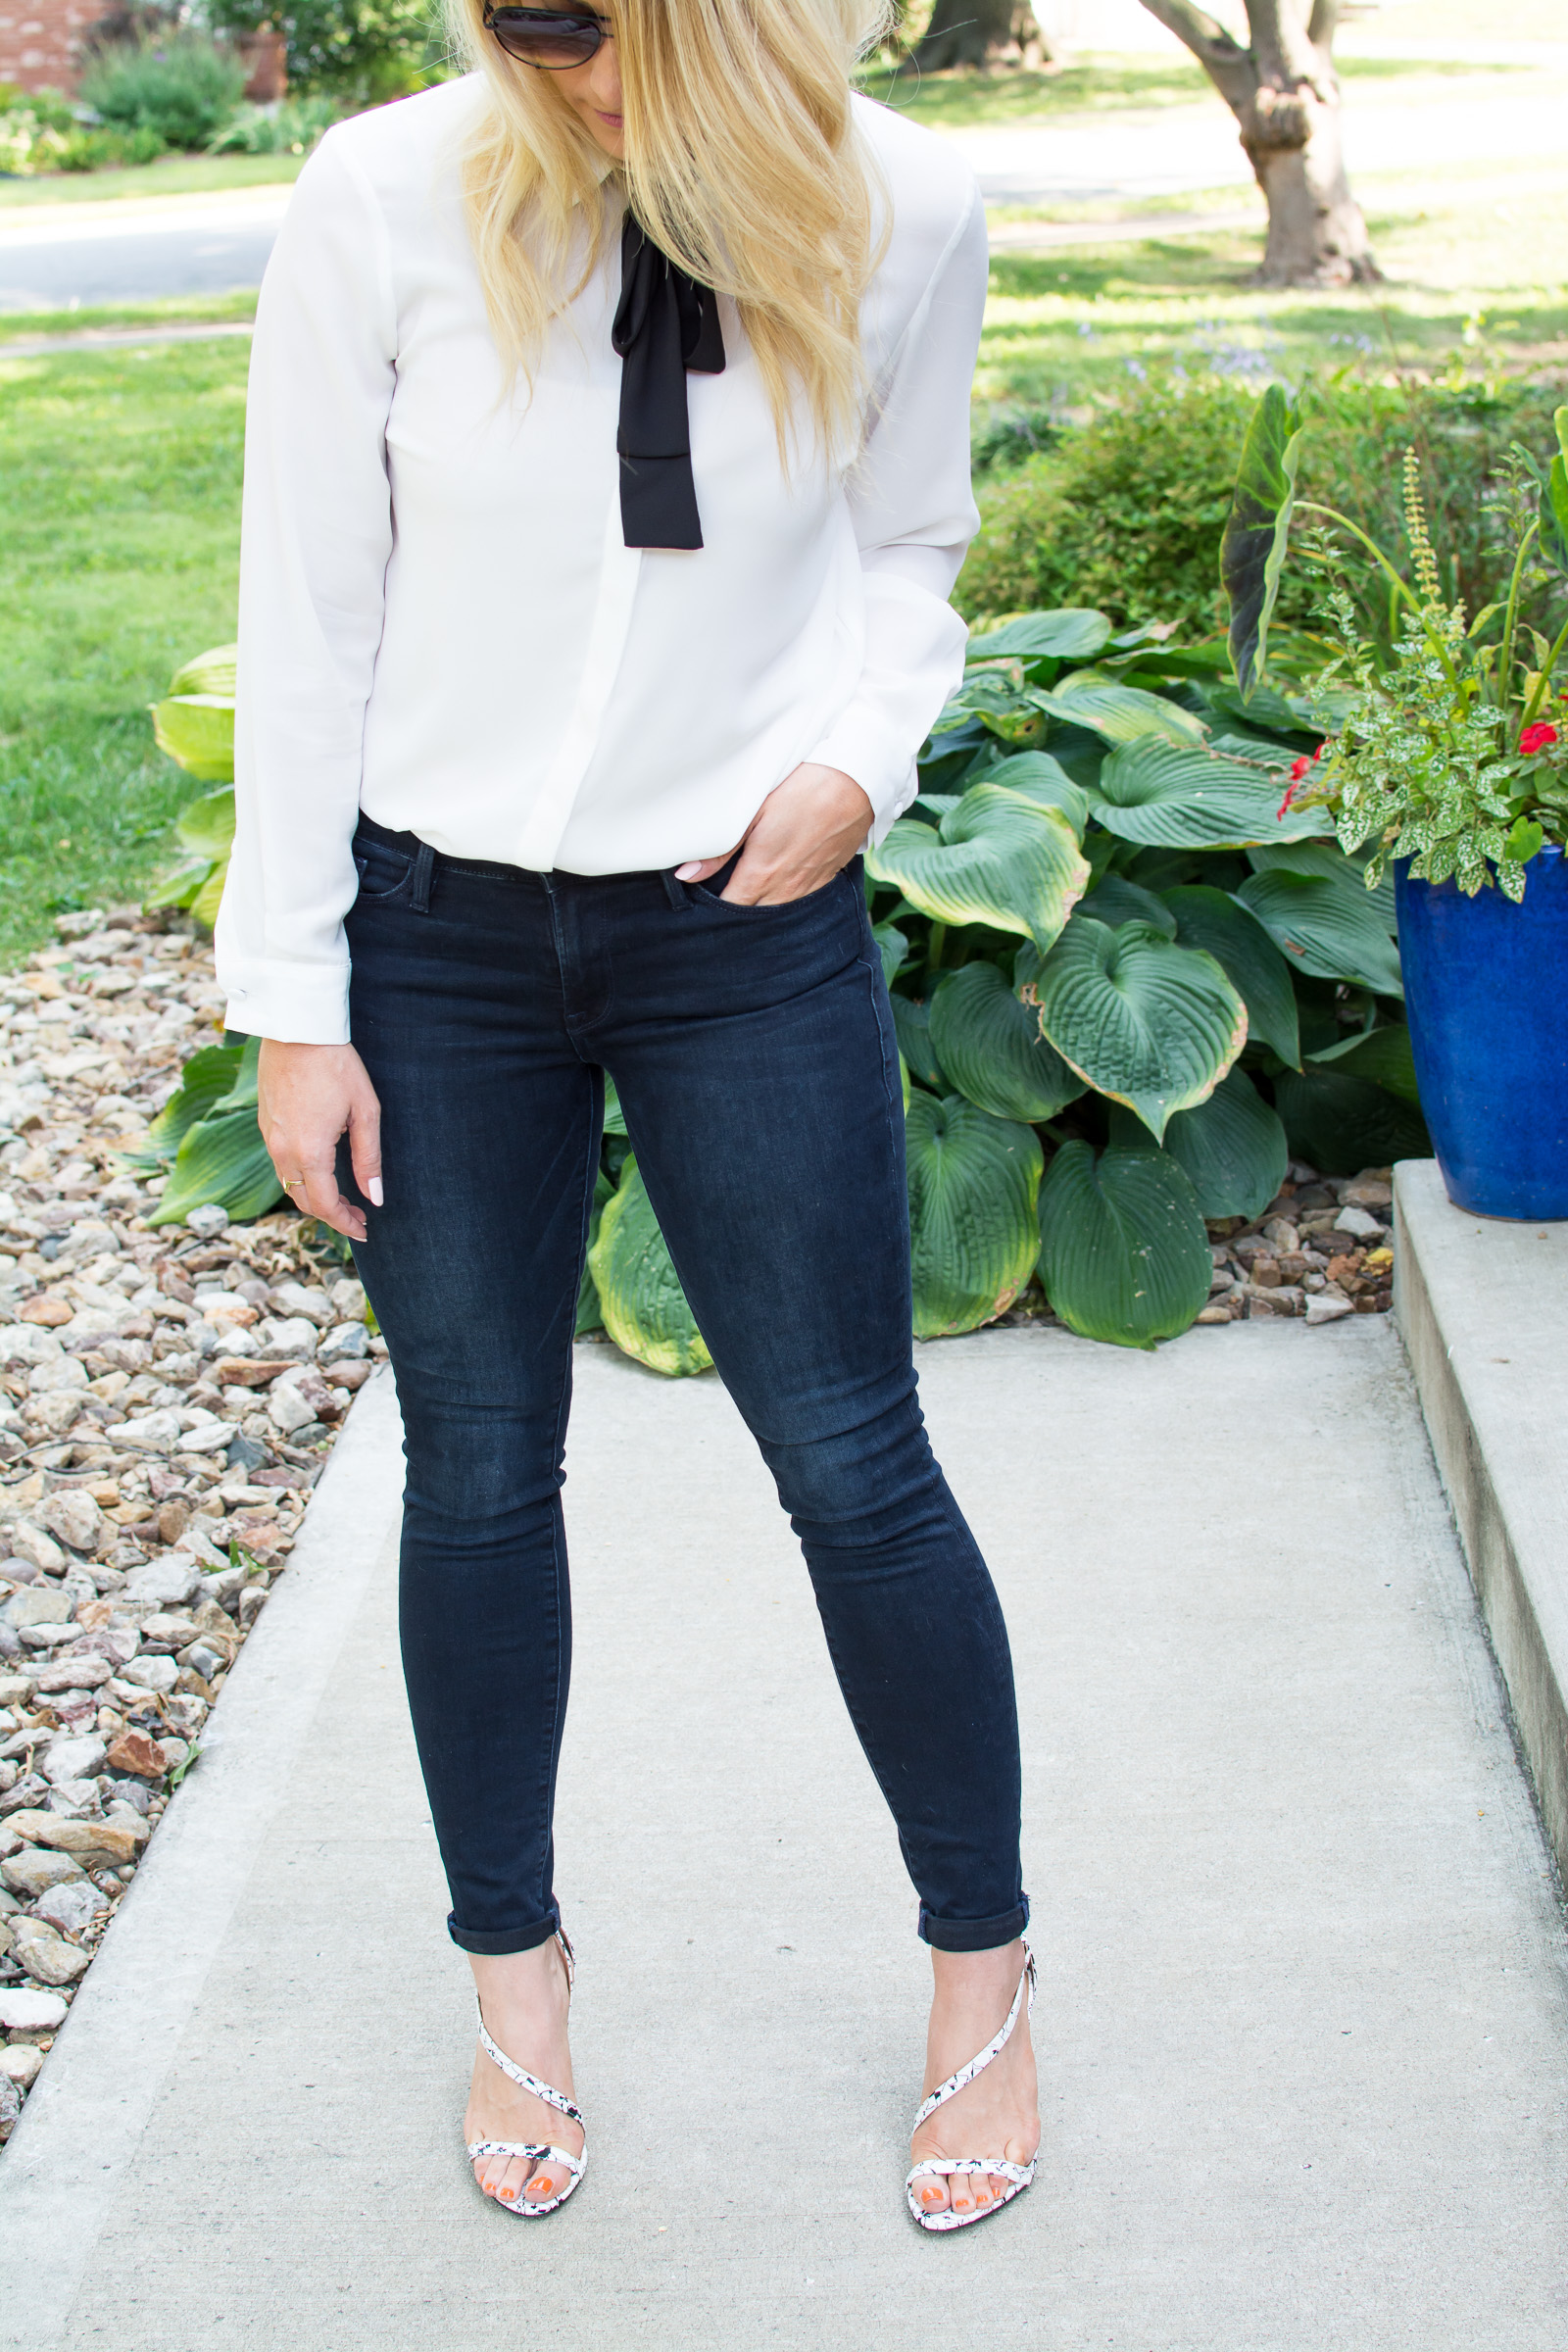 A Bow-tie Blouse with Dark Denim. | Ashley from LSR